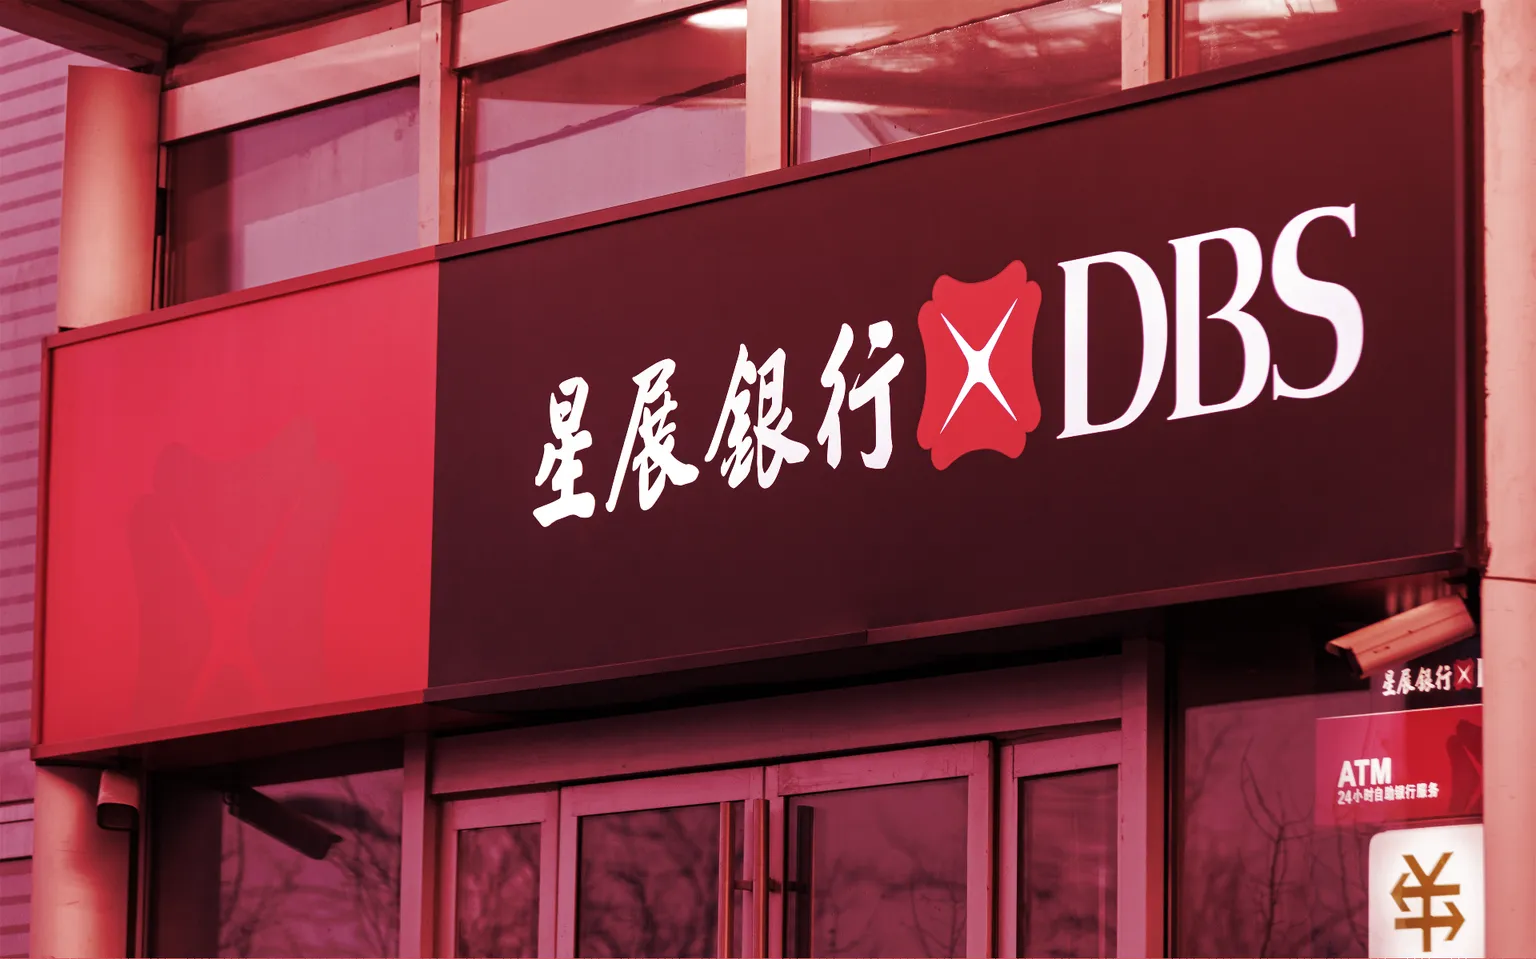 DBS is the largest bank in Southeast Asia. Image: Shutterstock.